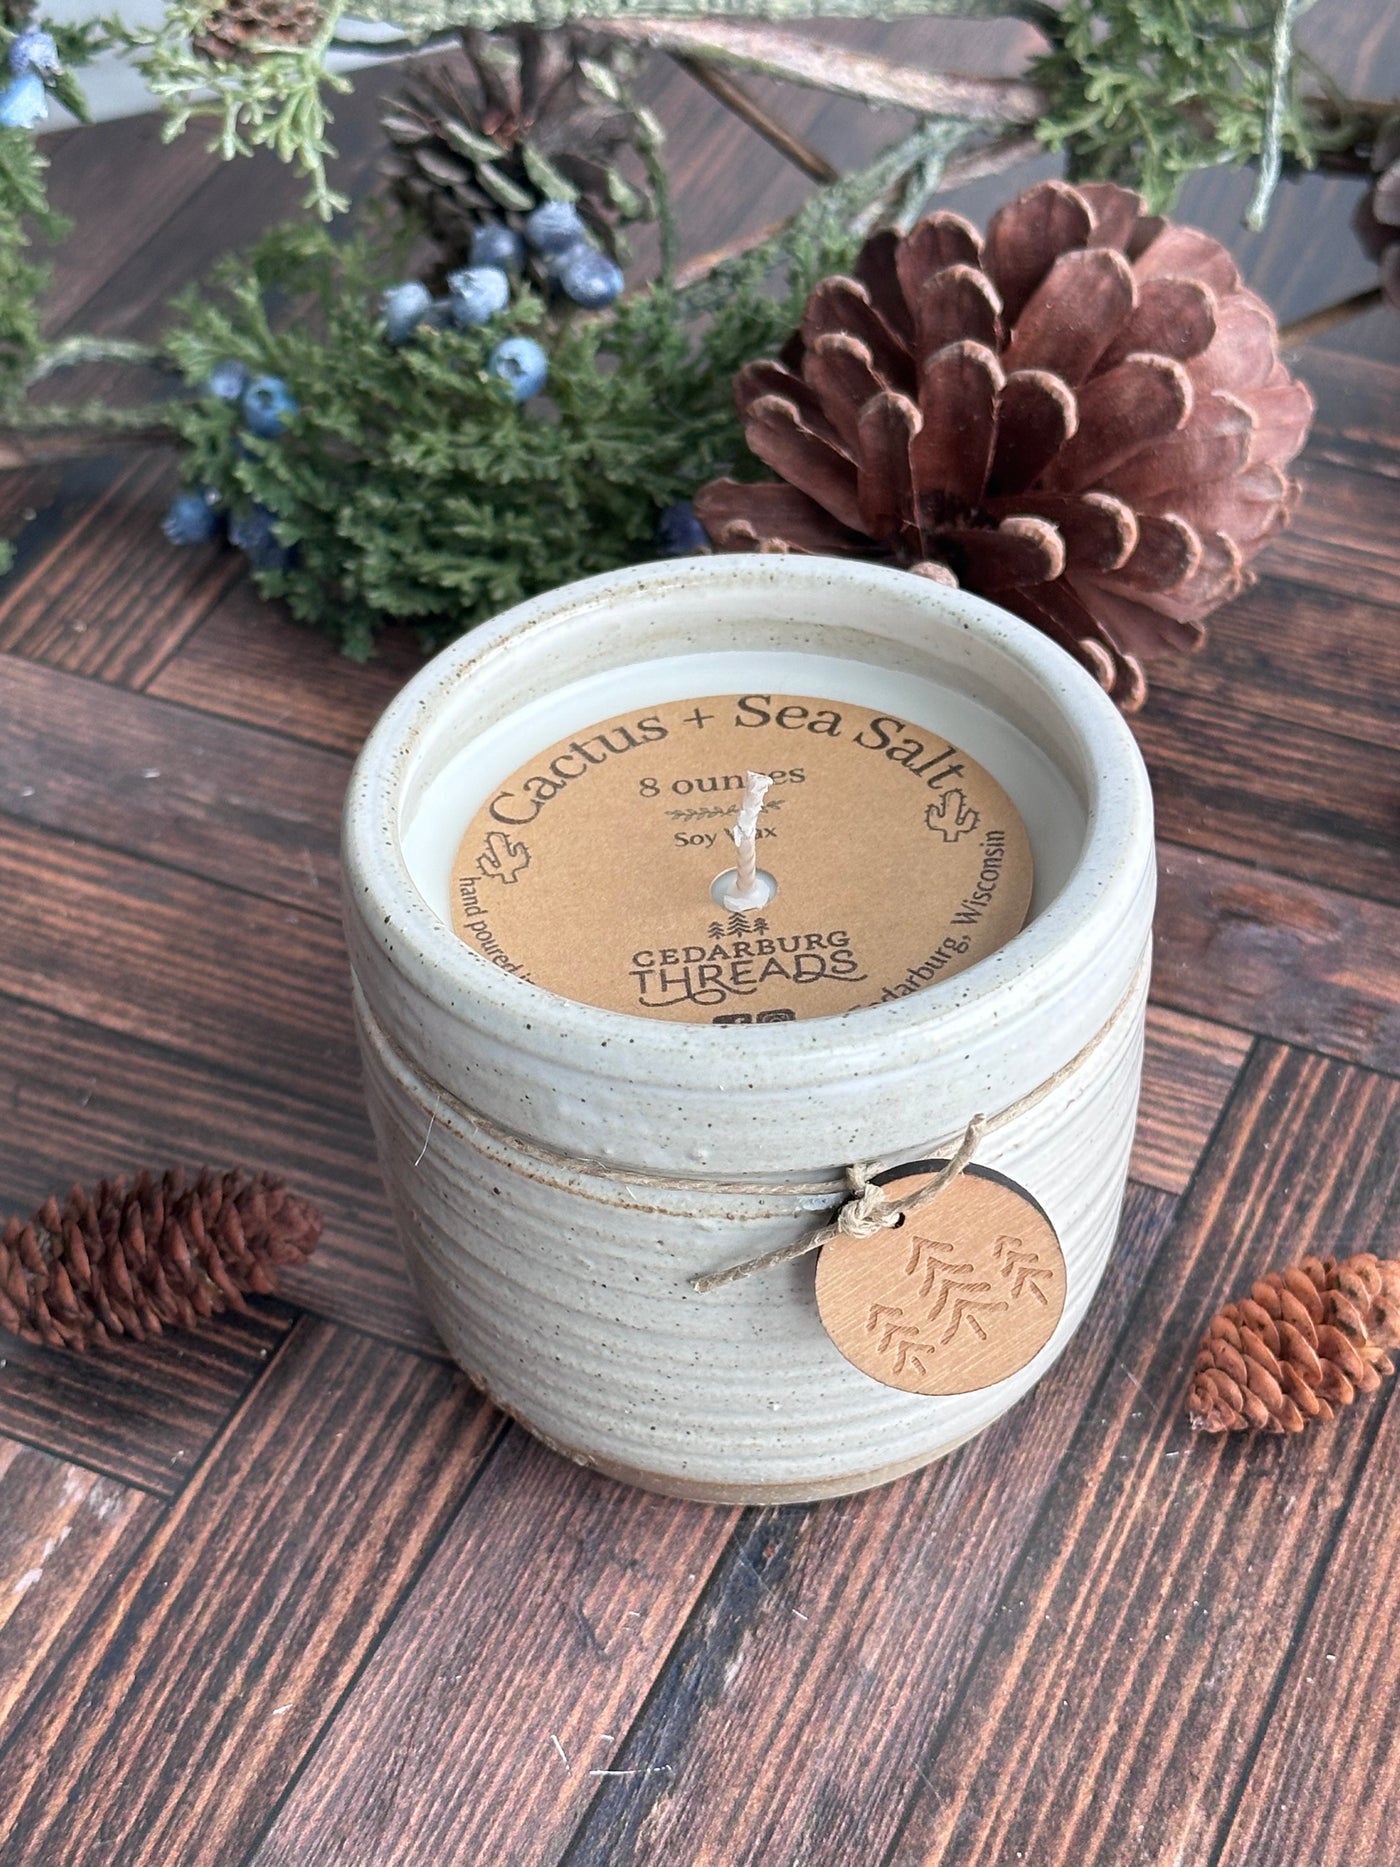 Cactus and sea salt hand poured soy candle in a handmade ceramic vessel in 8 ounces and white color